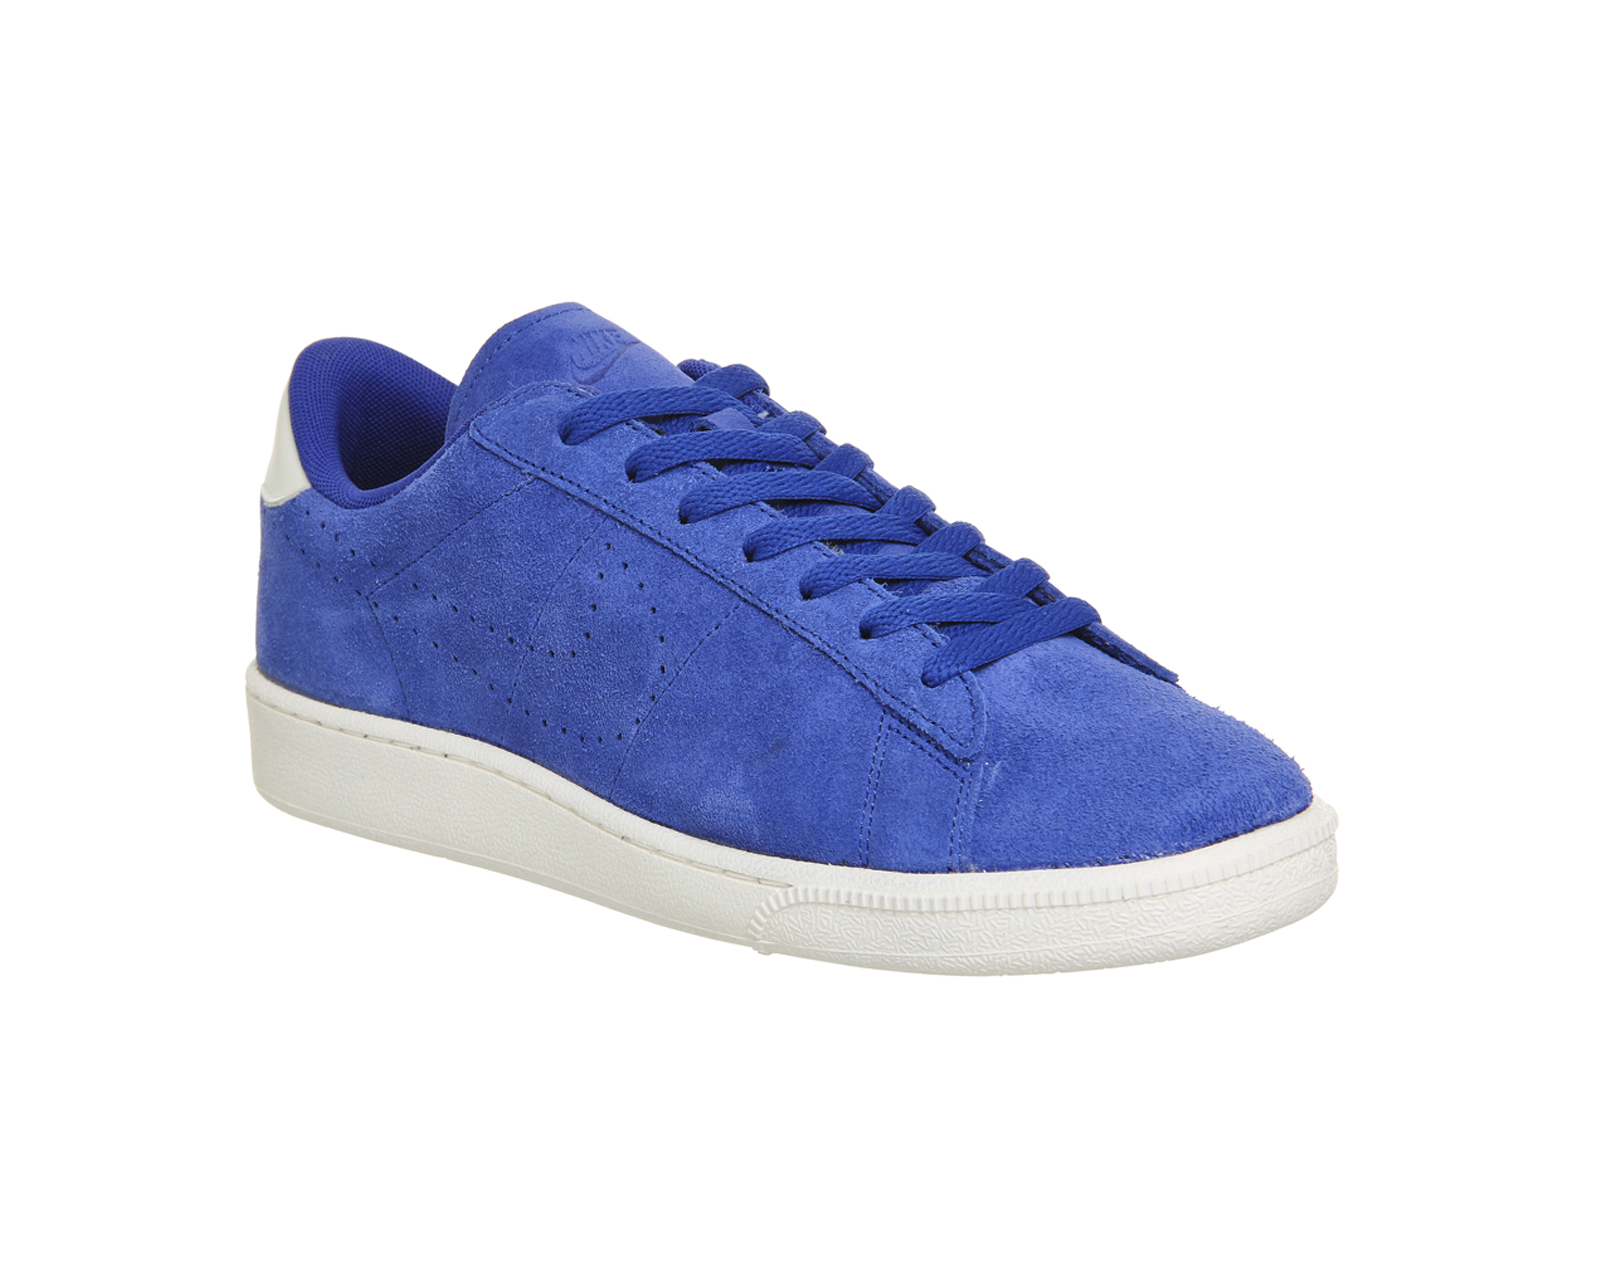 Nike Tennis Classic Cs Suede Old Royal - Unisex Sports